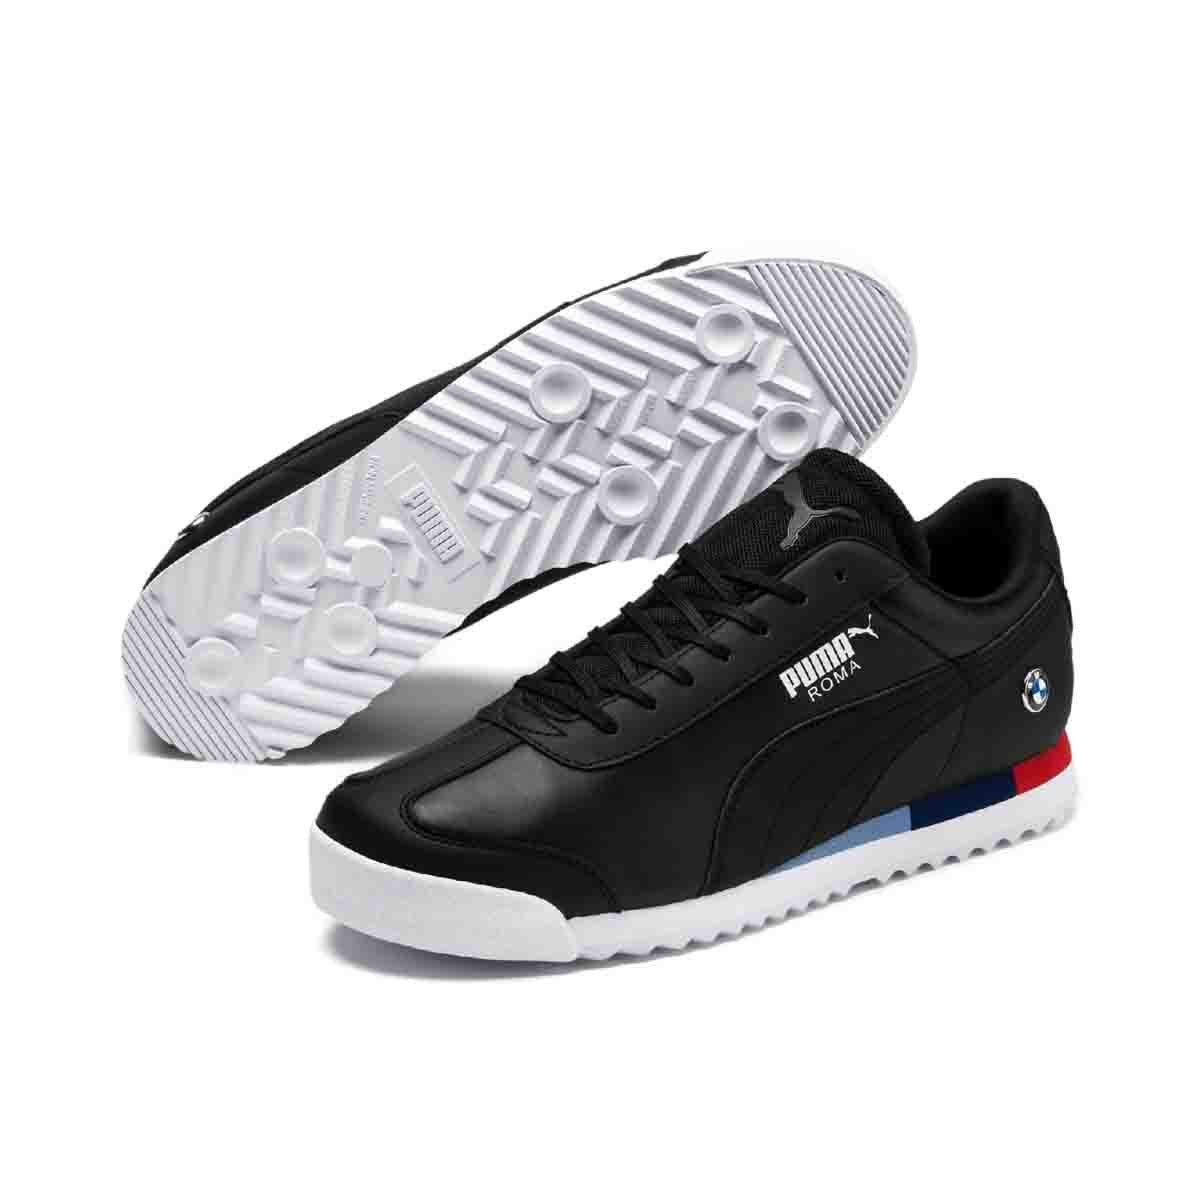 puma roma negro bmw buy clothes shoes online